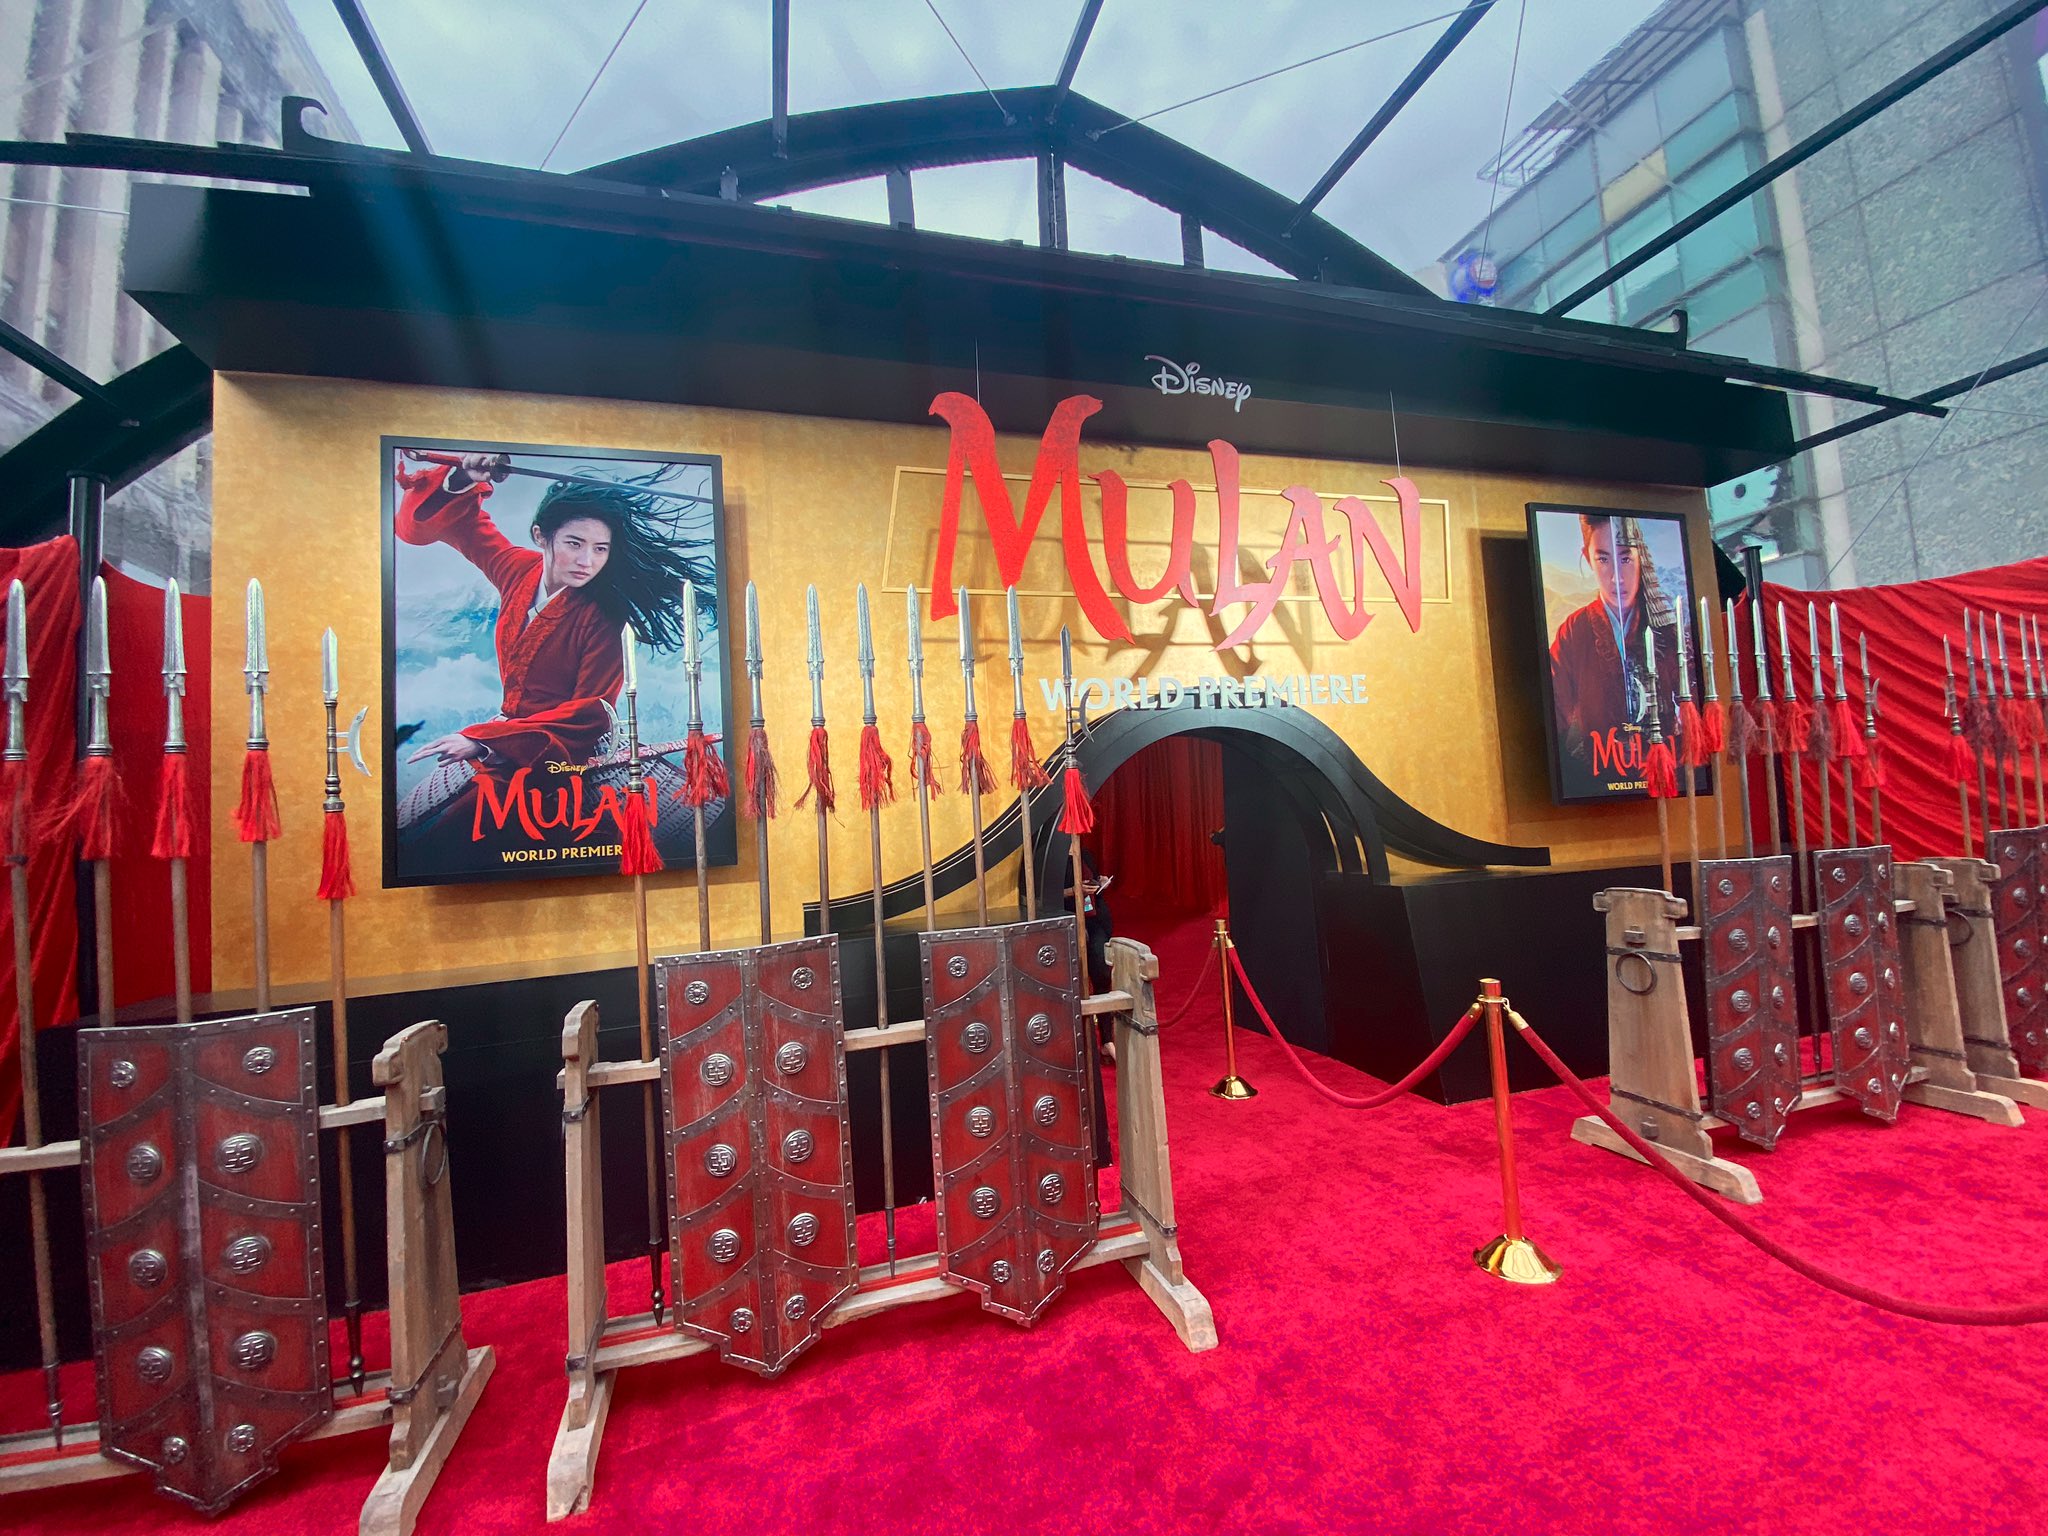 Disney's 'Mulan' opens weak in China with $23.2 million at box offices